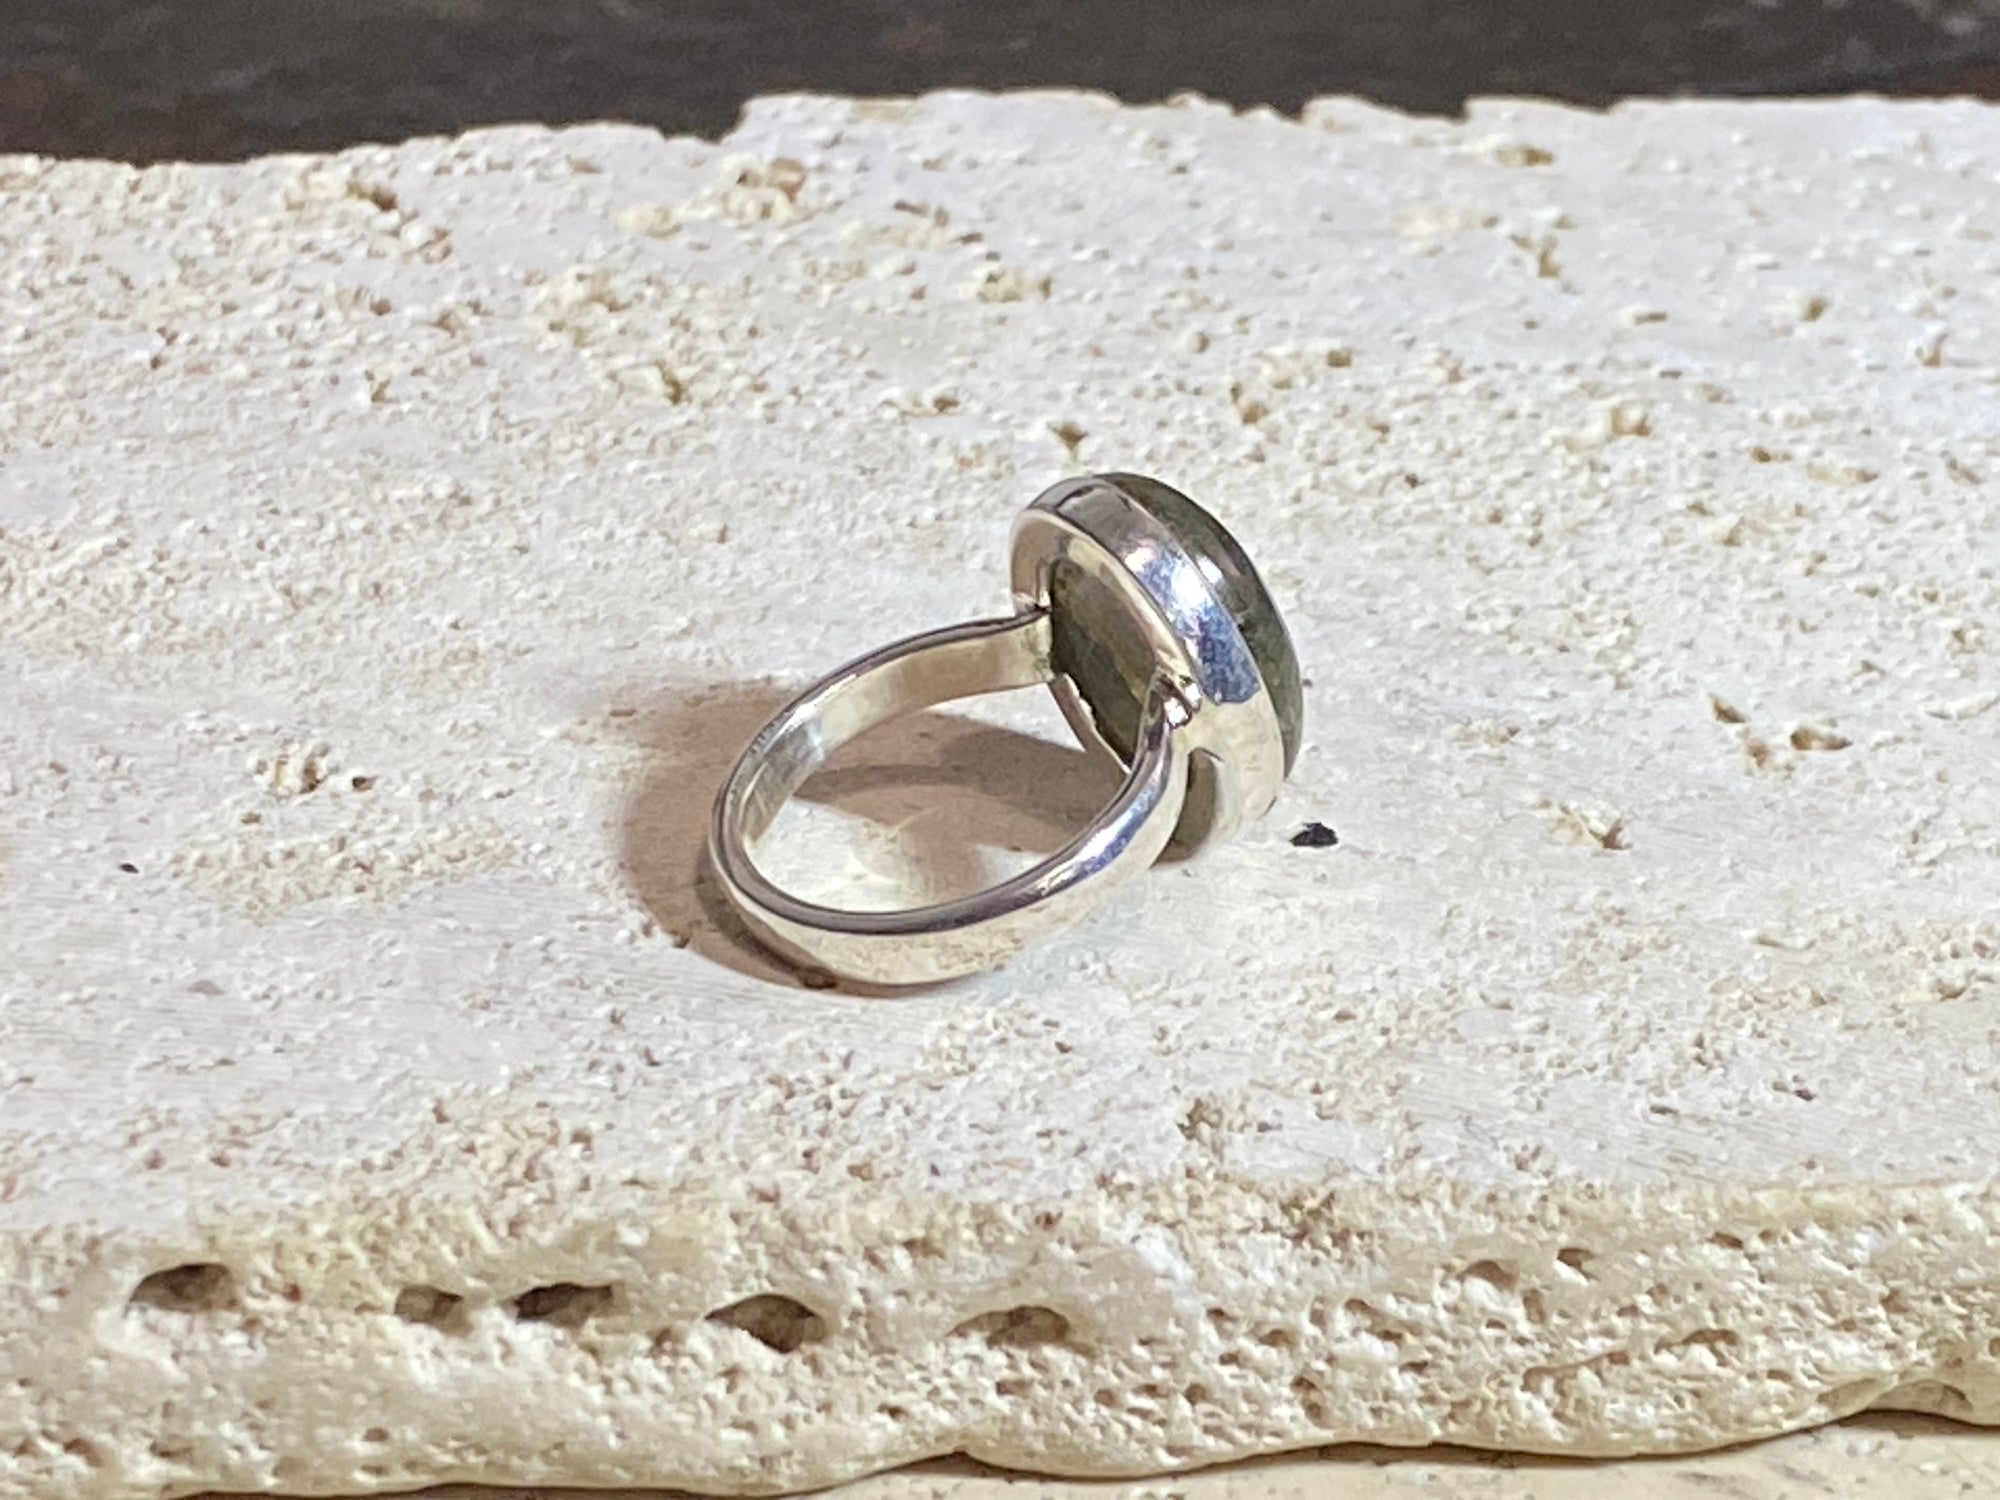 Round oval labradorite ring set in sterling silver. A high quality stone with deep blue fire.  Size 6